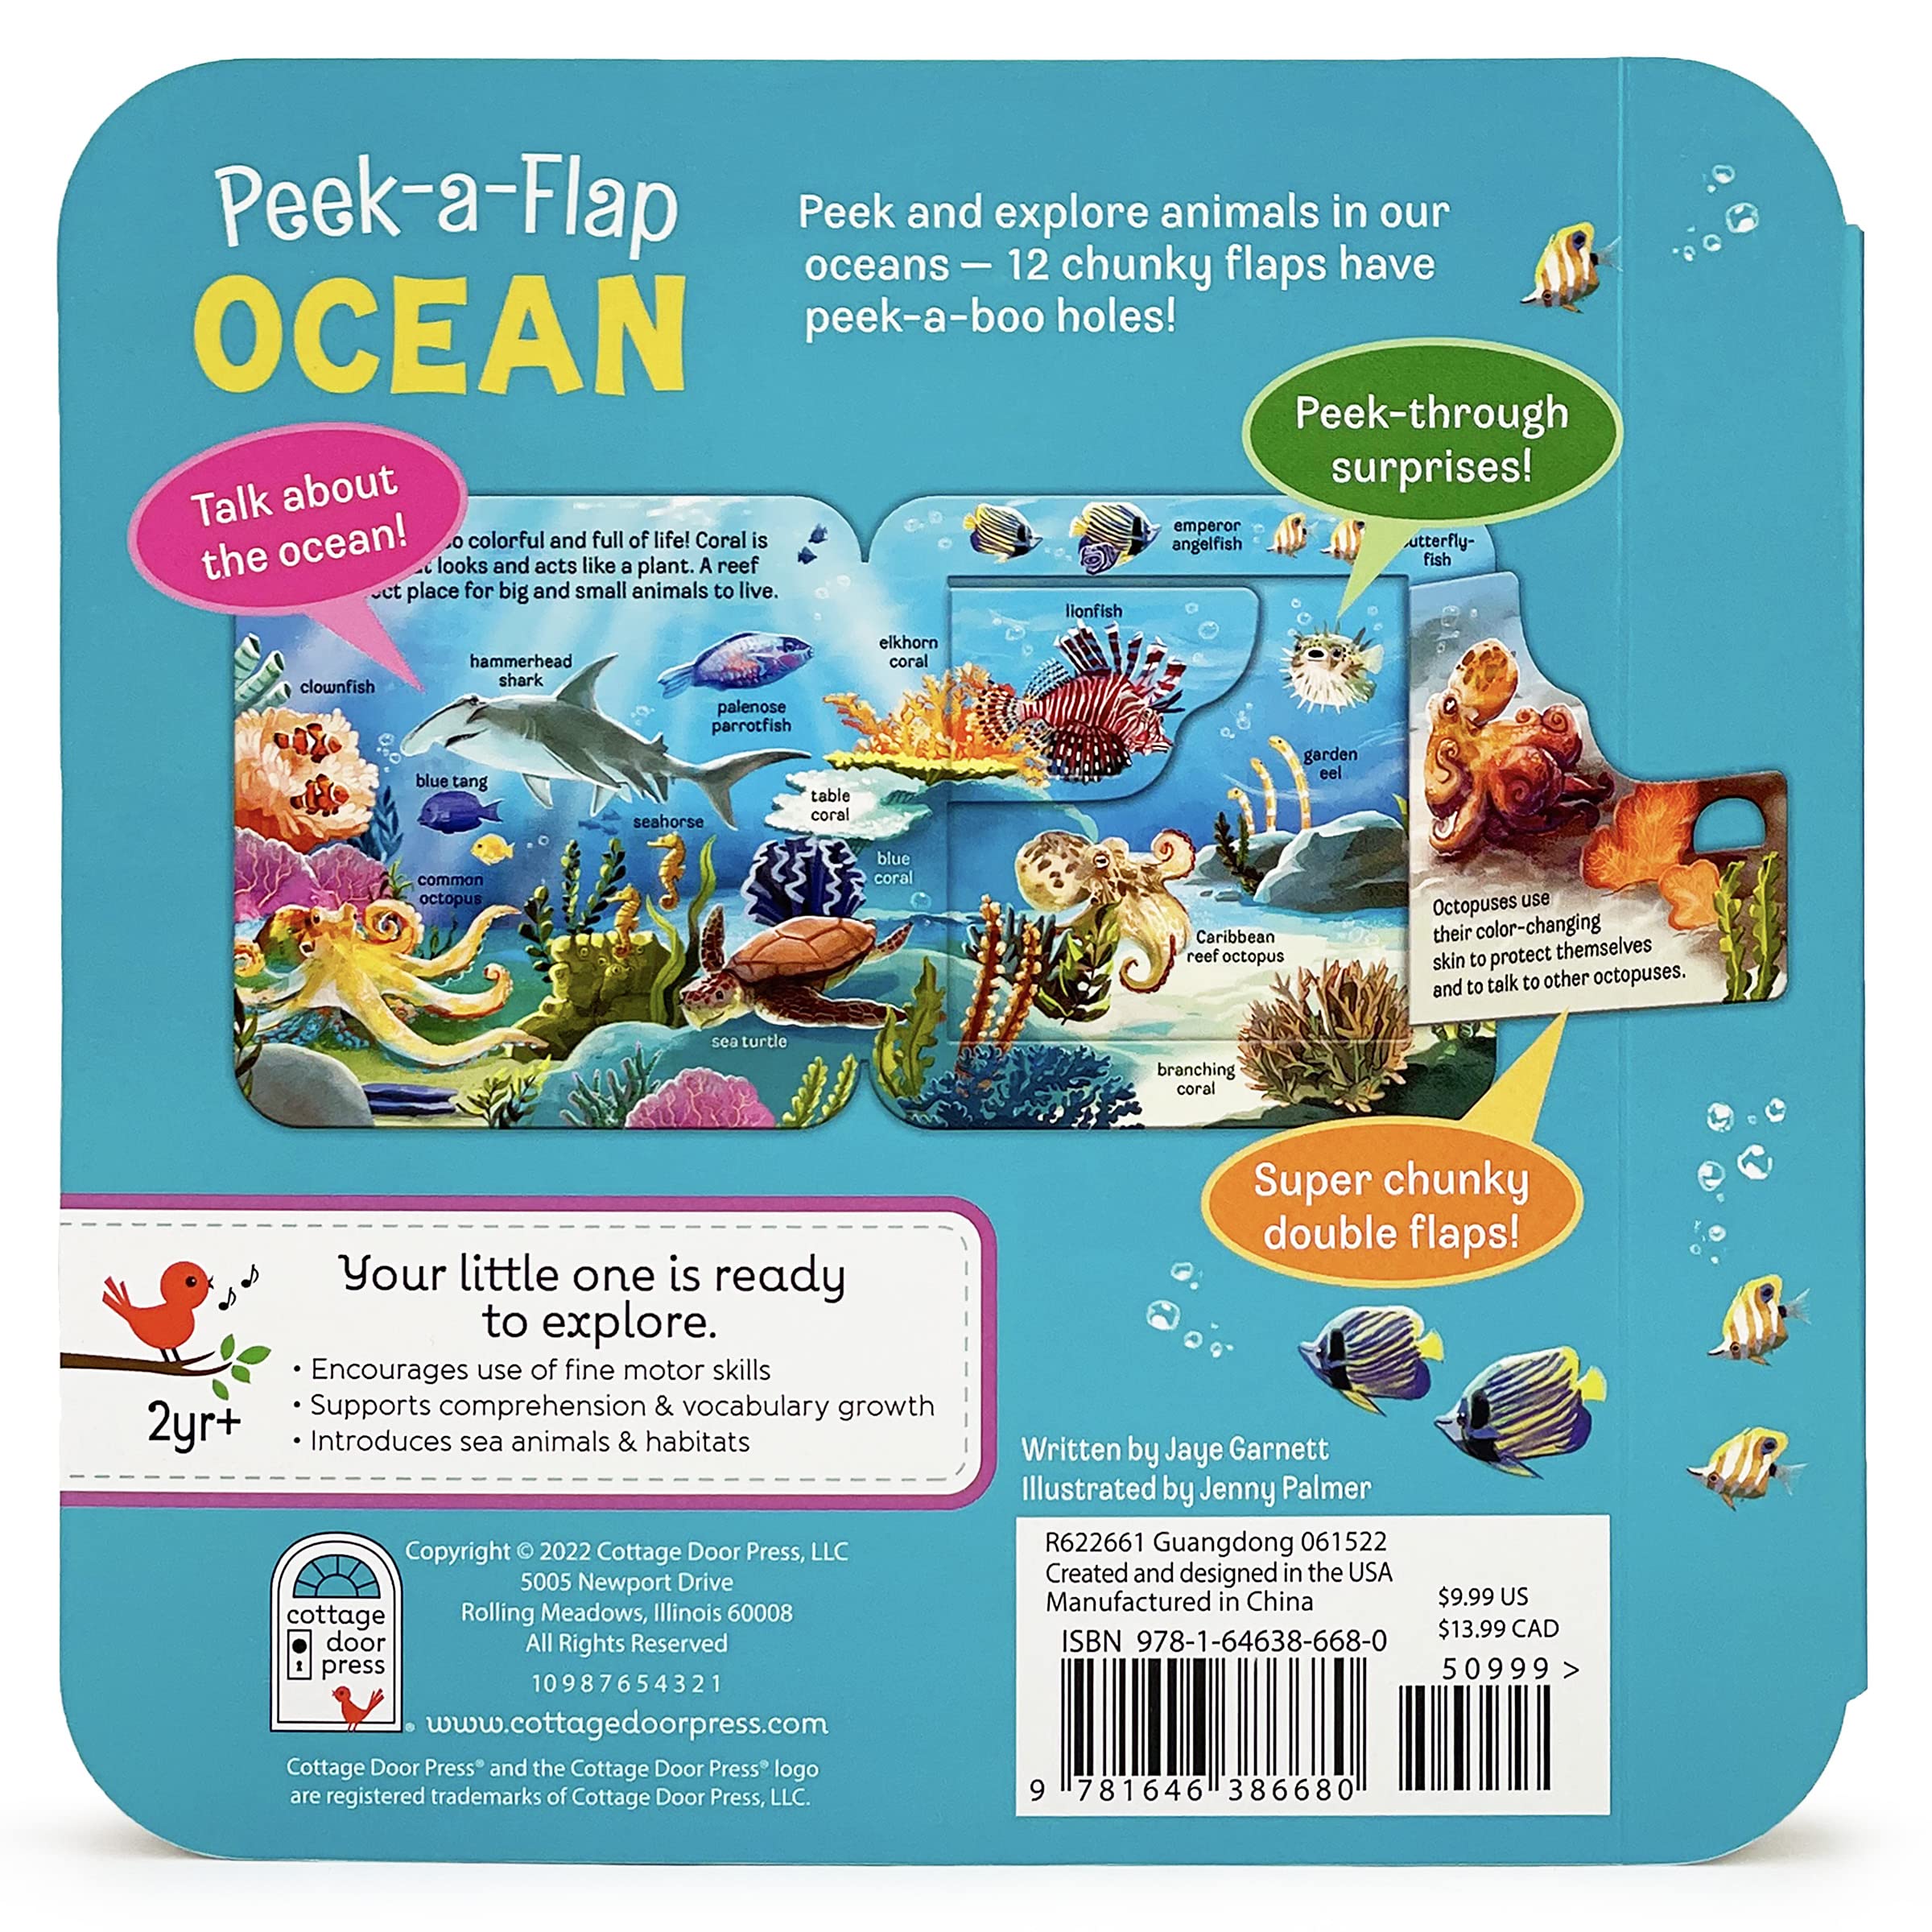 Peek-a-Flap Ocean Children's Lift-a-Flap Board Book for Children Learning about the Sea and Water Animals, Ages 2-5